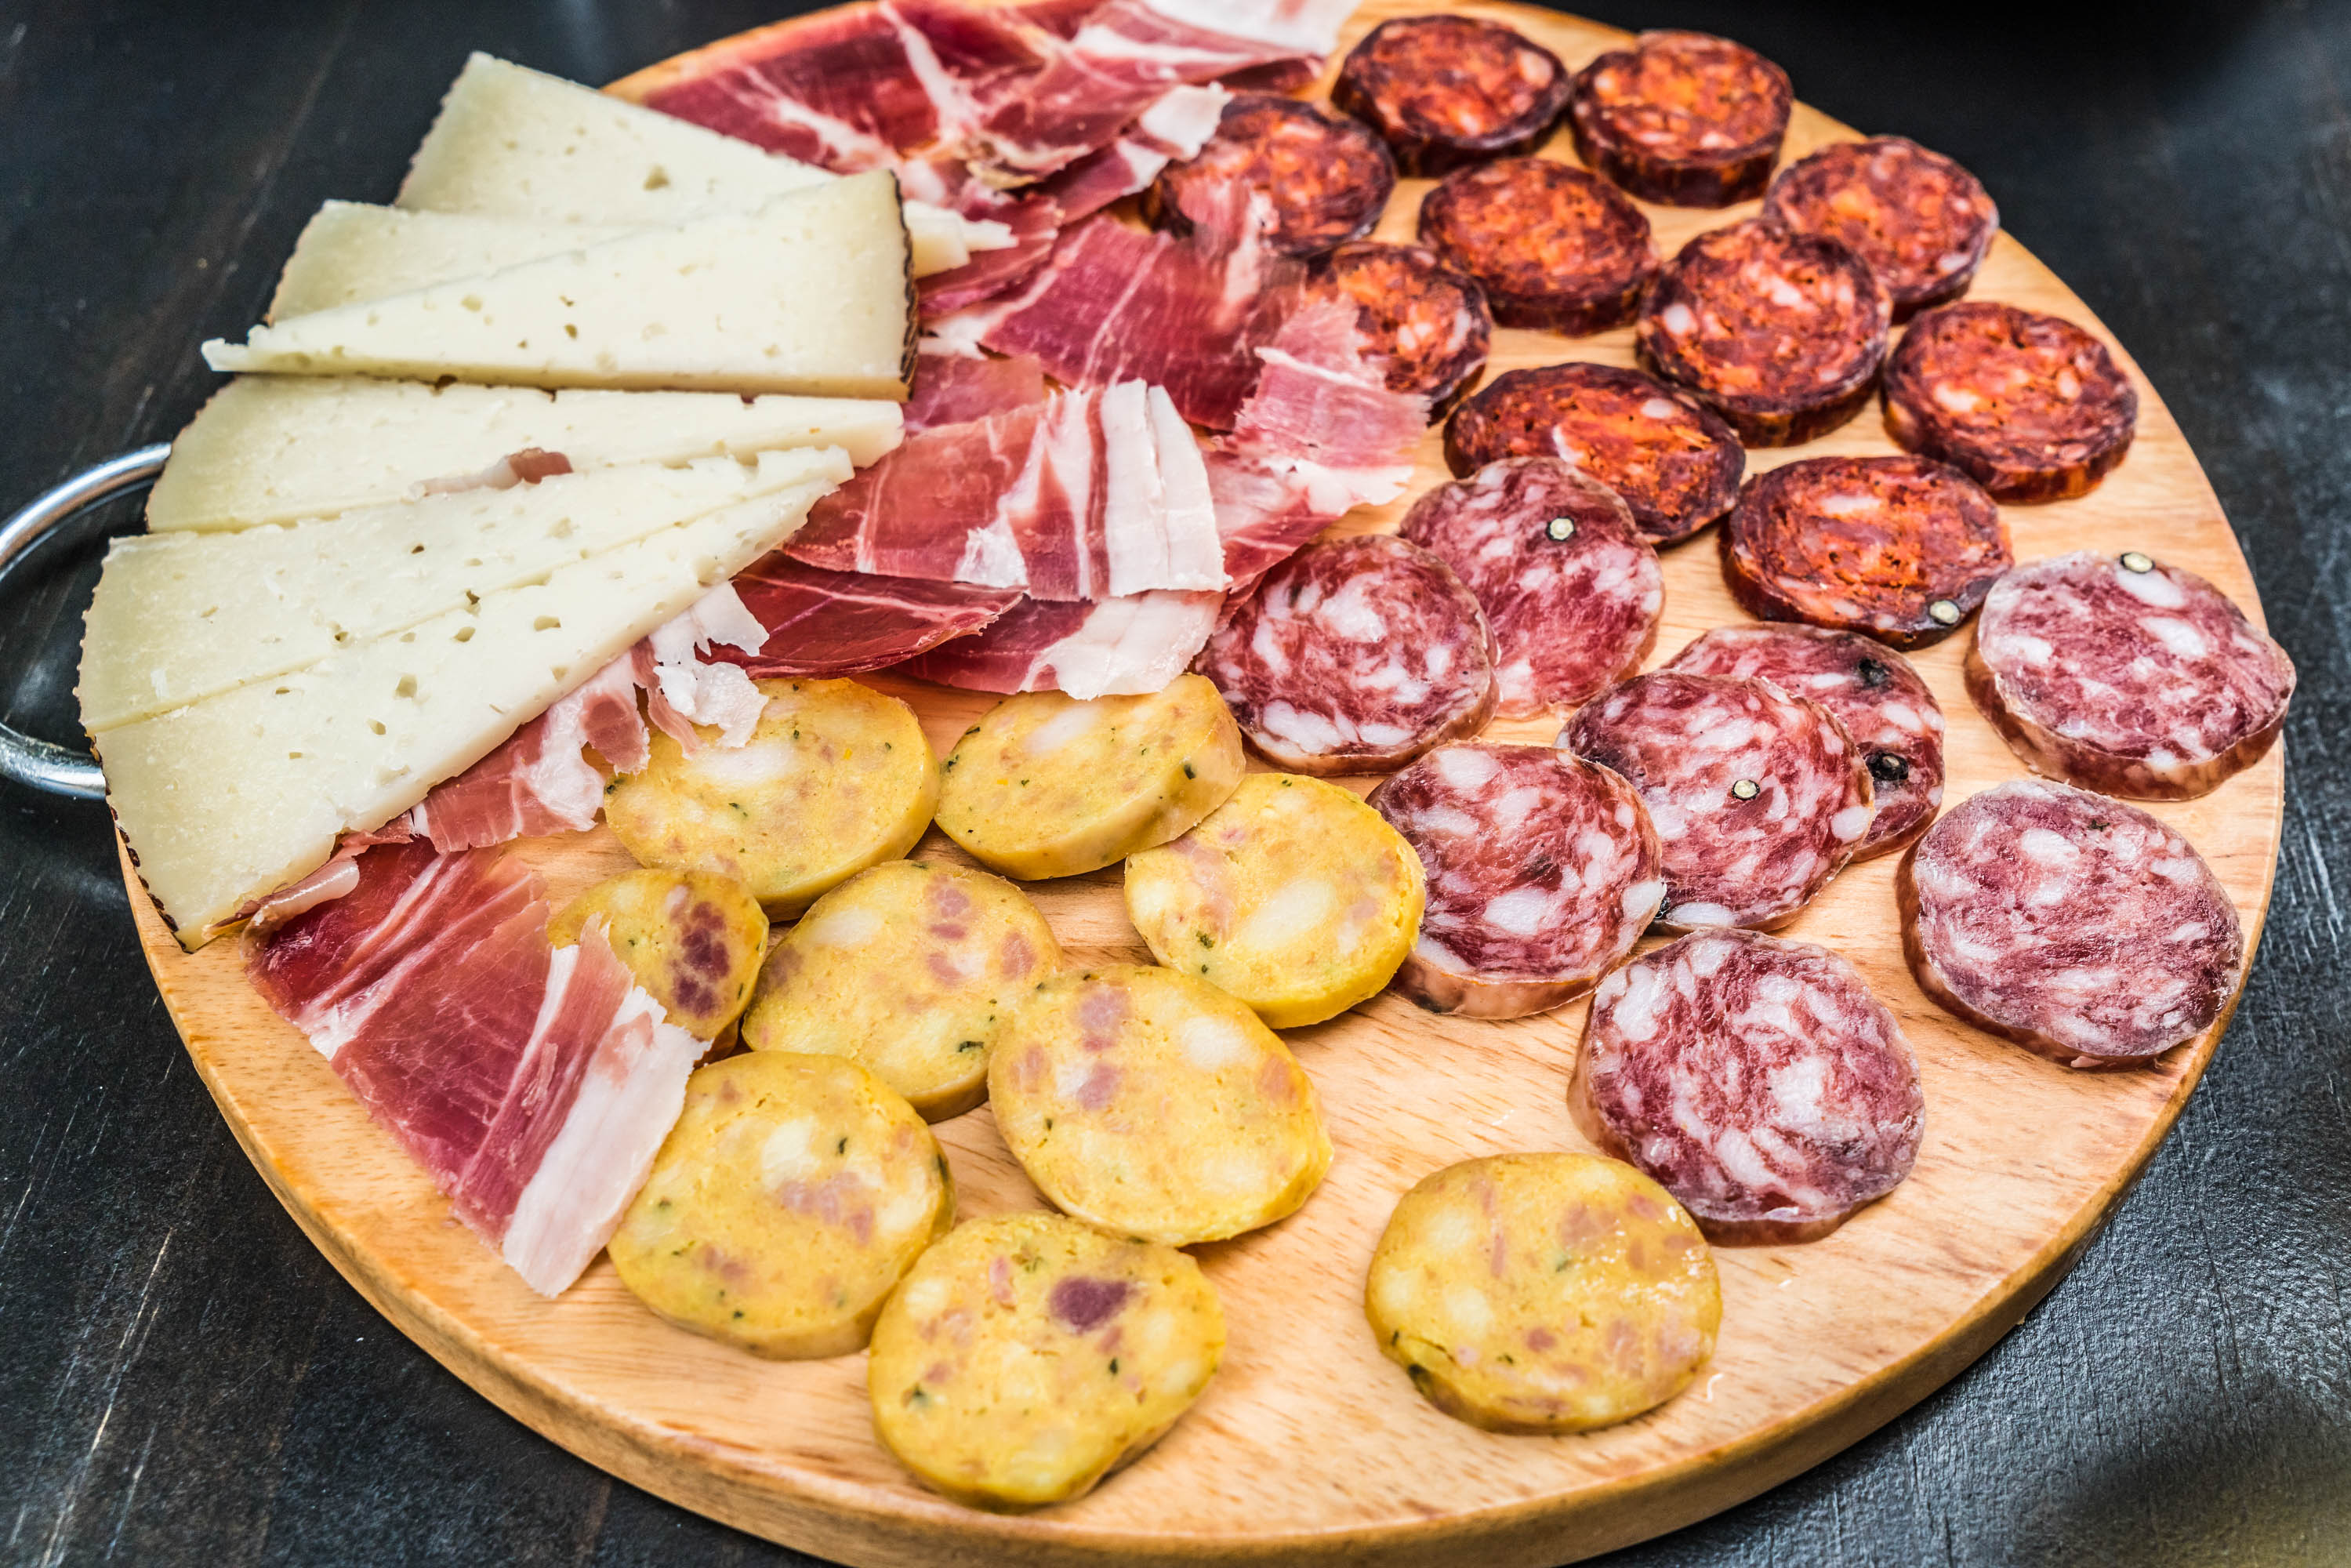 Typical cured ham, sausage and cheese plate tapa in Granada, Andalusia, Spain.